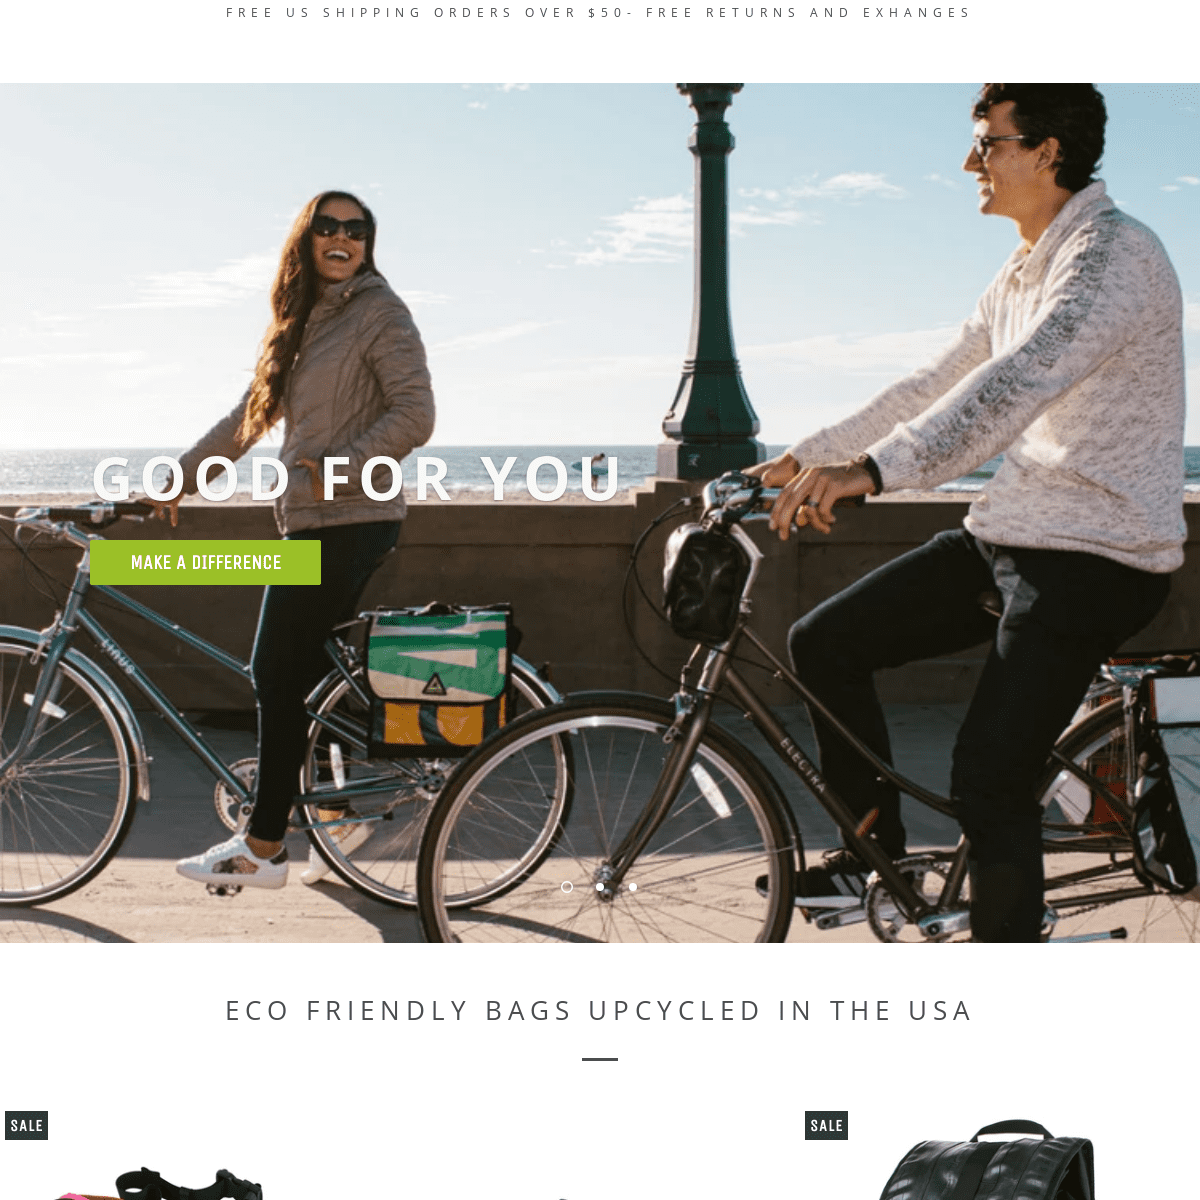 Outdoor and lifestyle bags and accessories made in Colorado, USA.